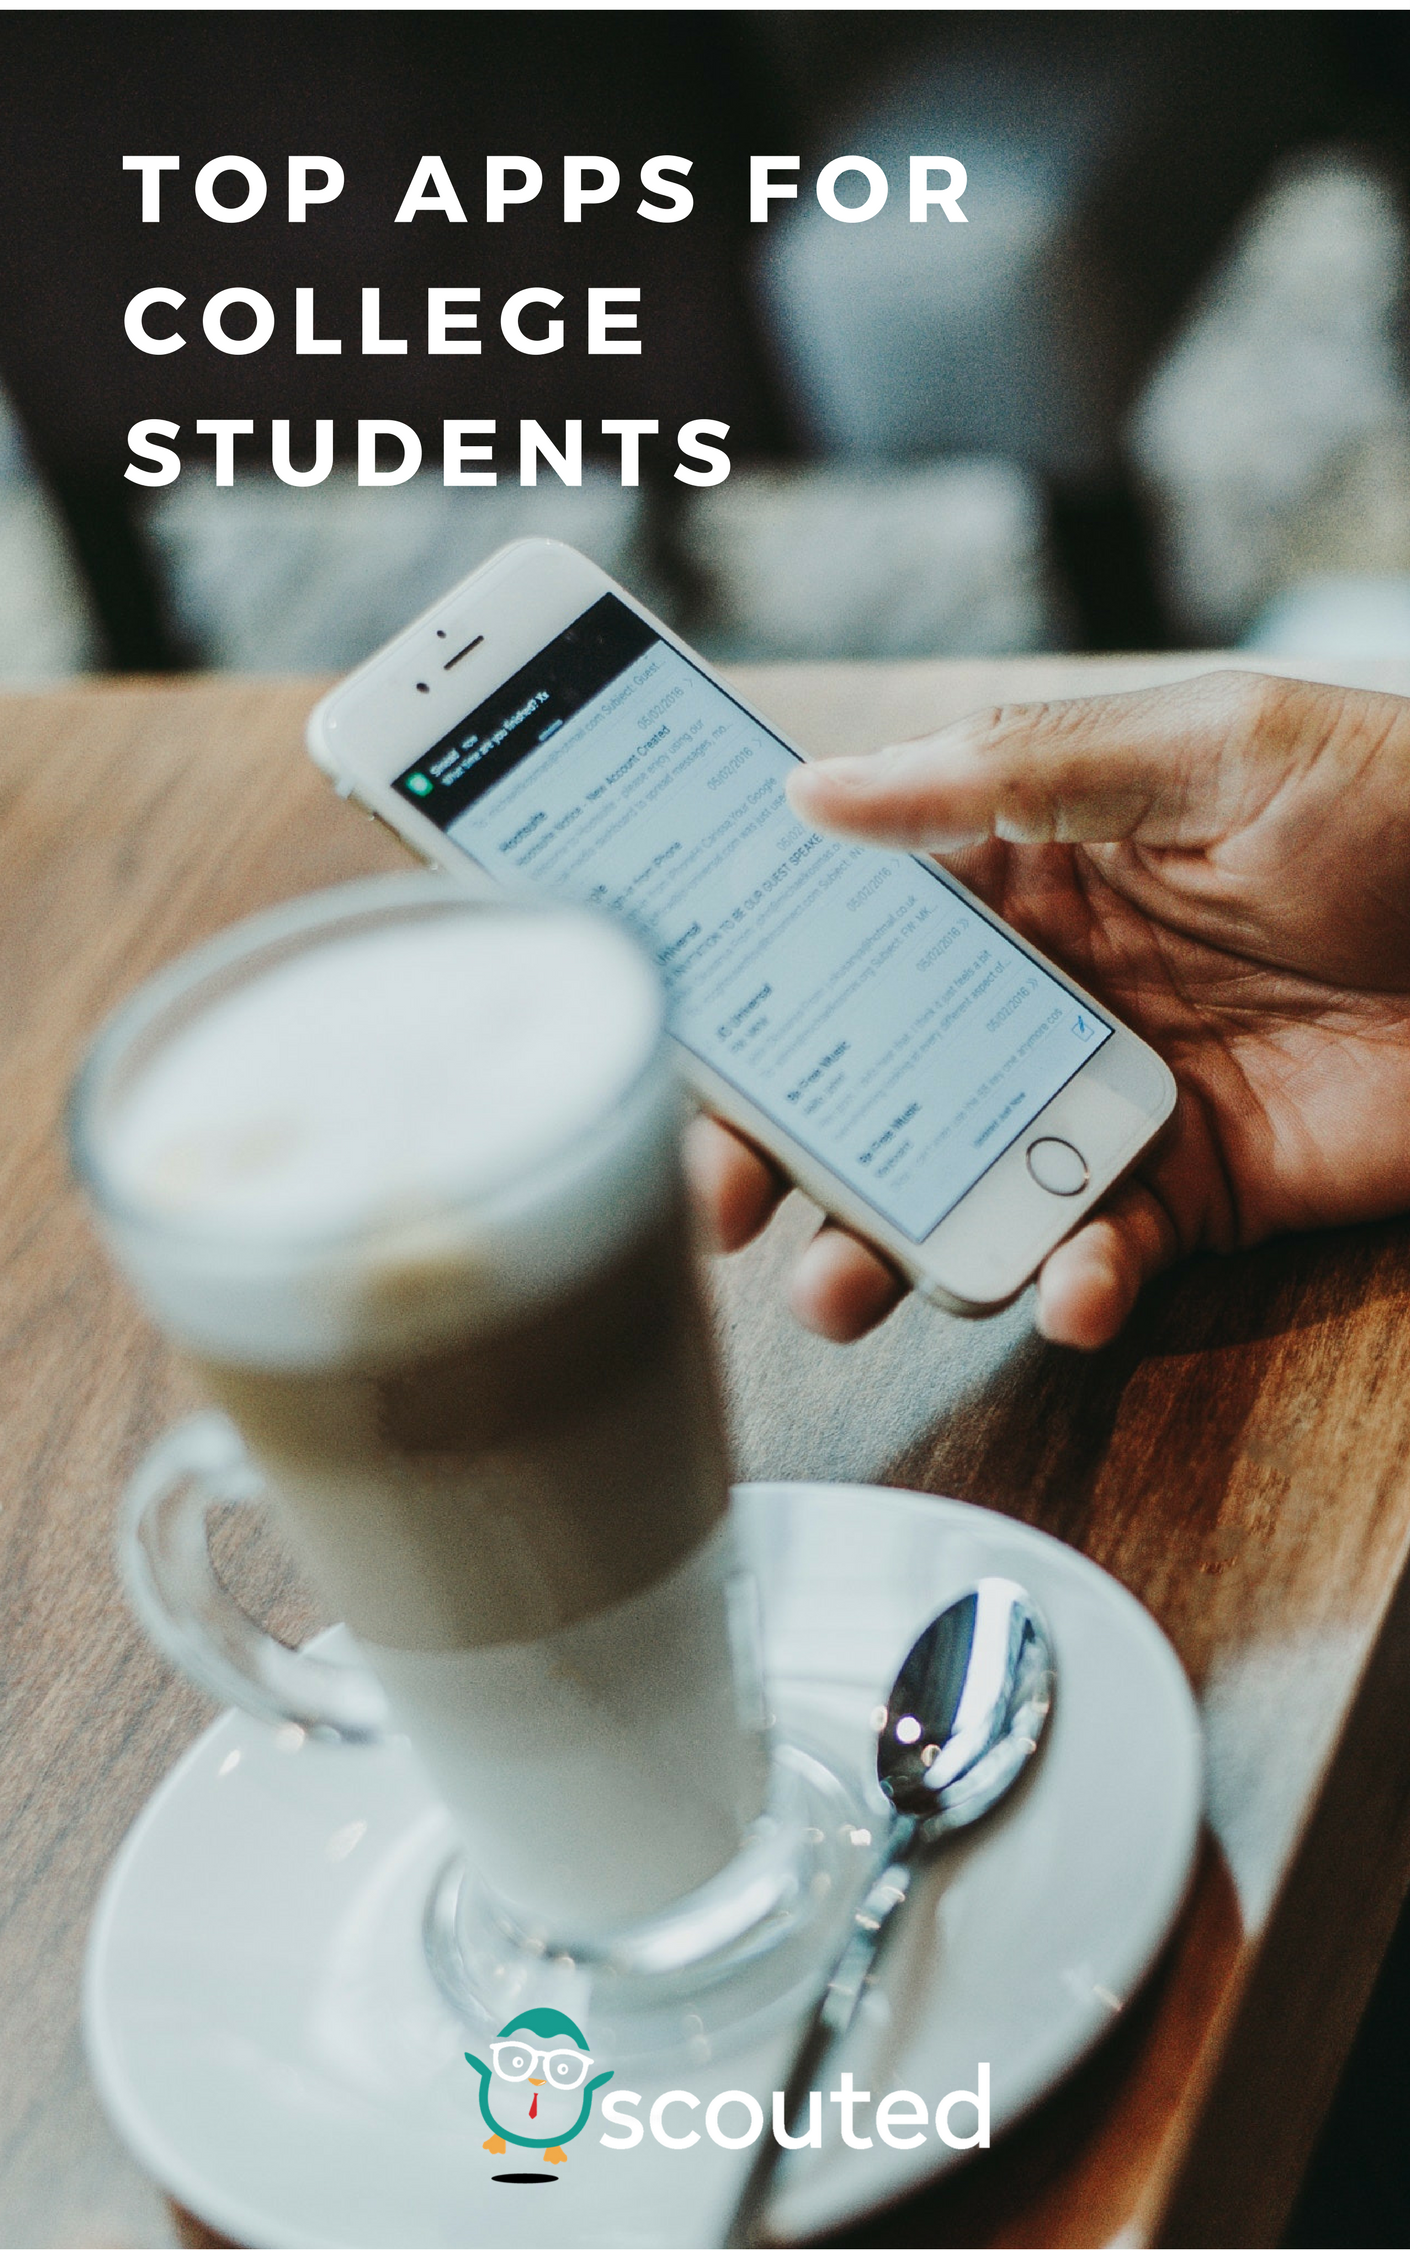 They say that high school is the best time of your life, but why can’t college be instead? Yeah, finals week and getting internships are both pretty rough but fret not! We’re here to help with six apps for college students that will help you survive (and hopefully thrive.)